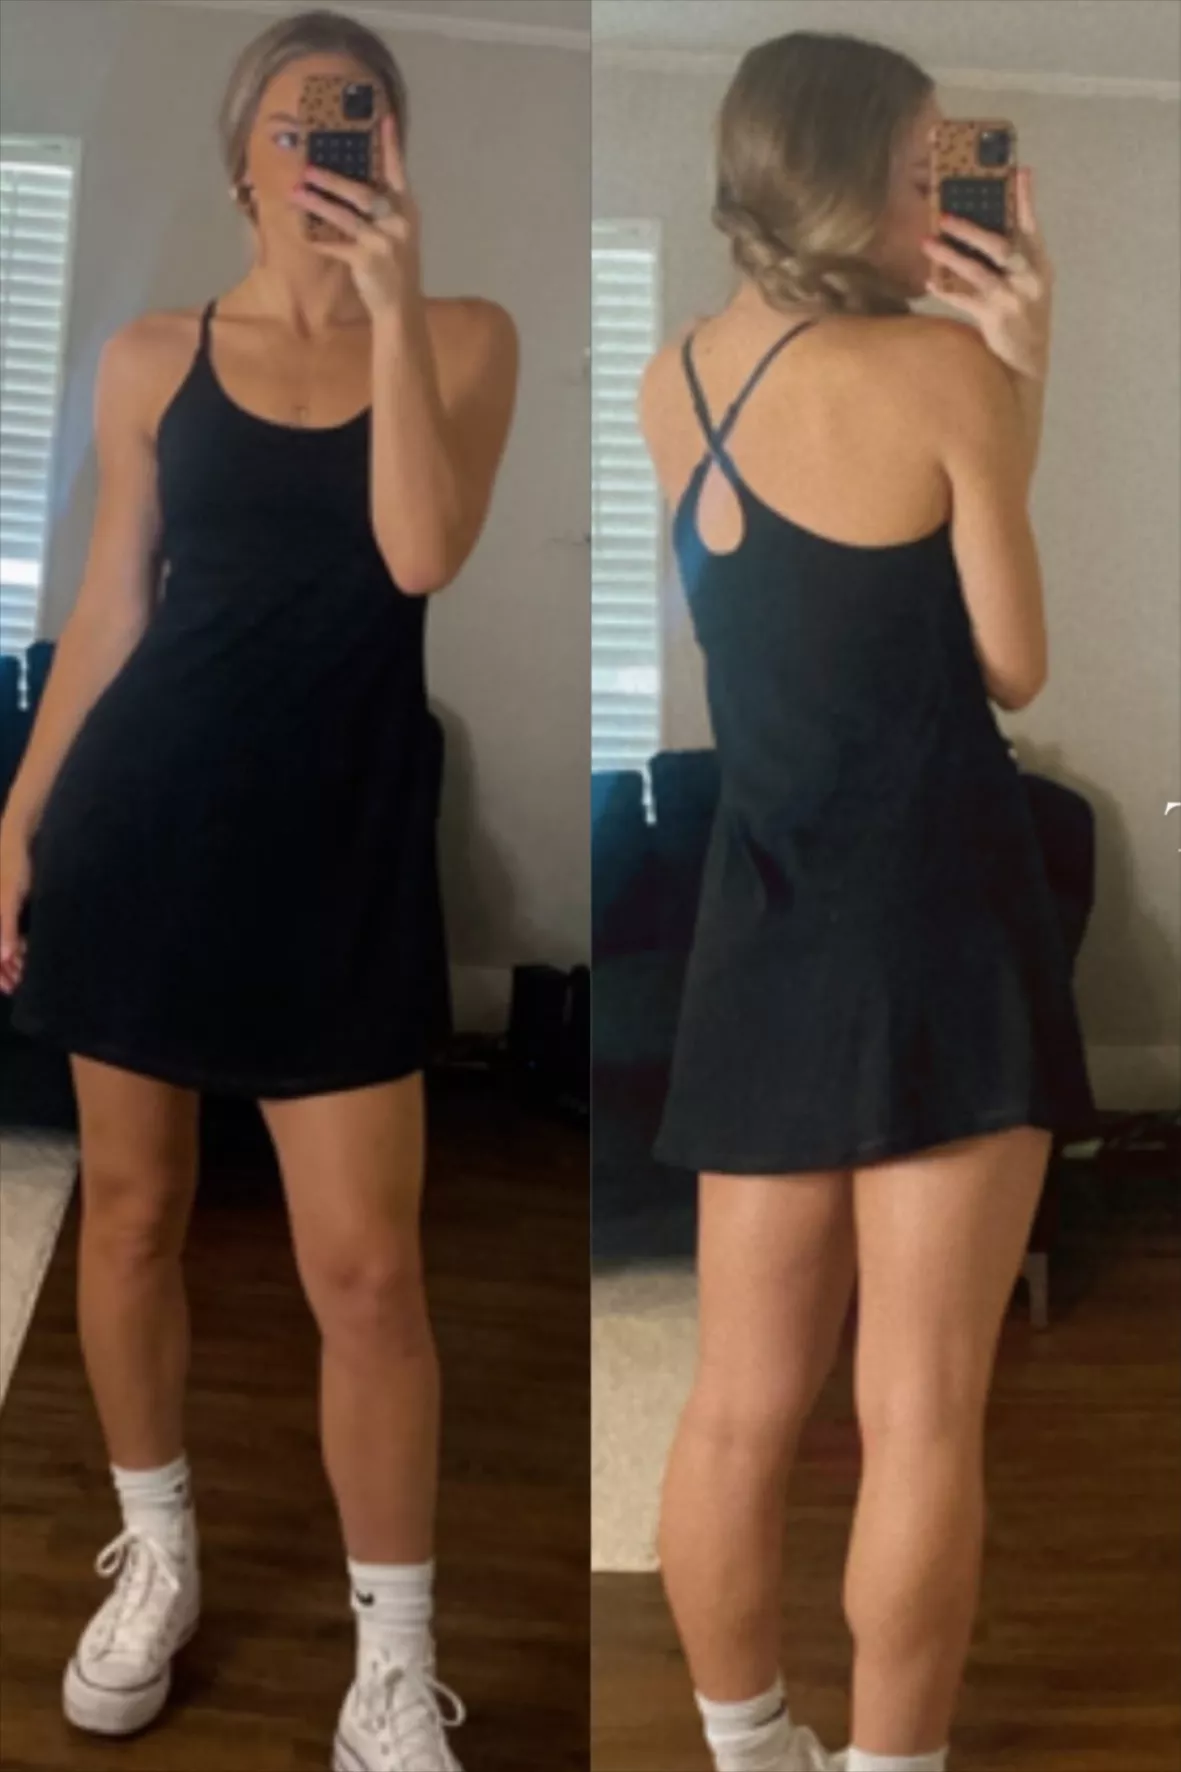 Workout tennis dress for women with built-in bra shorts